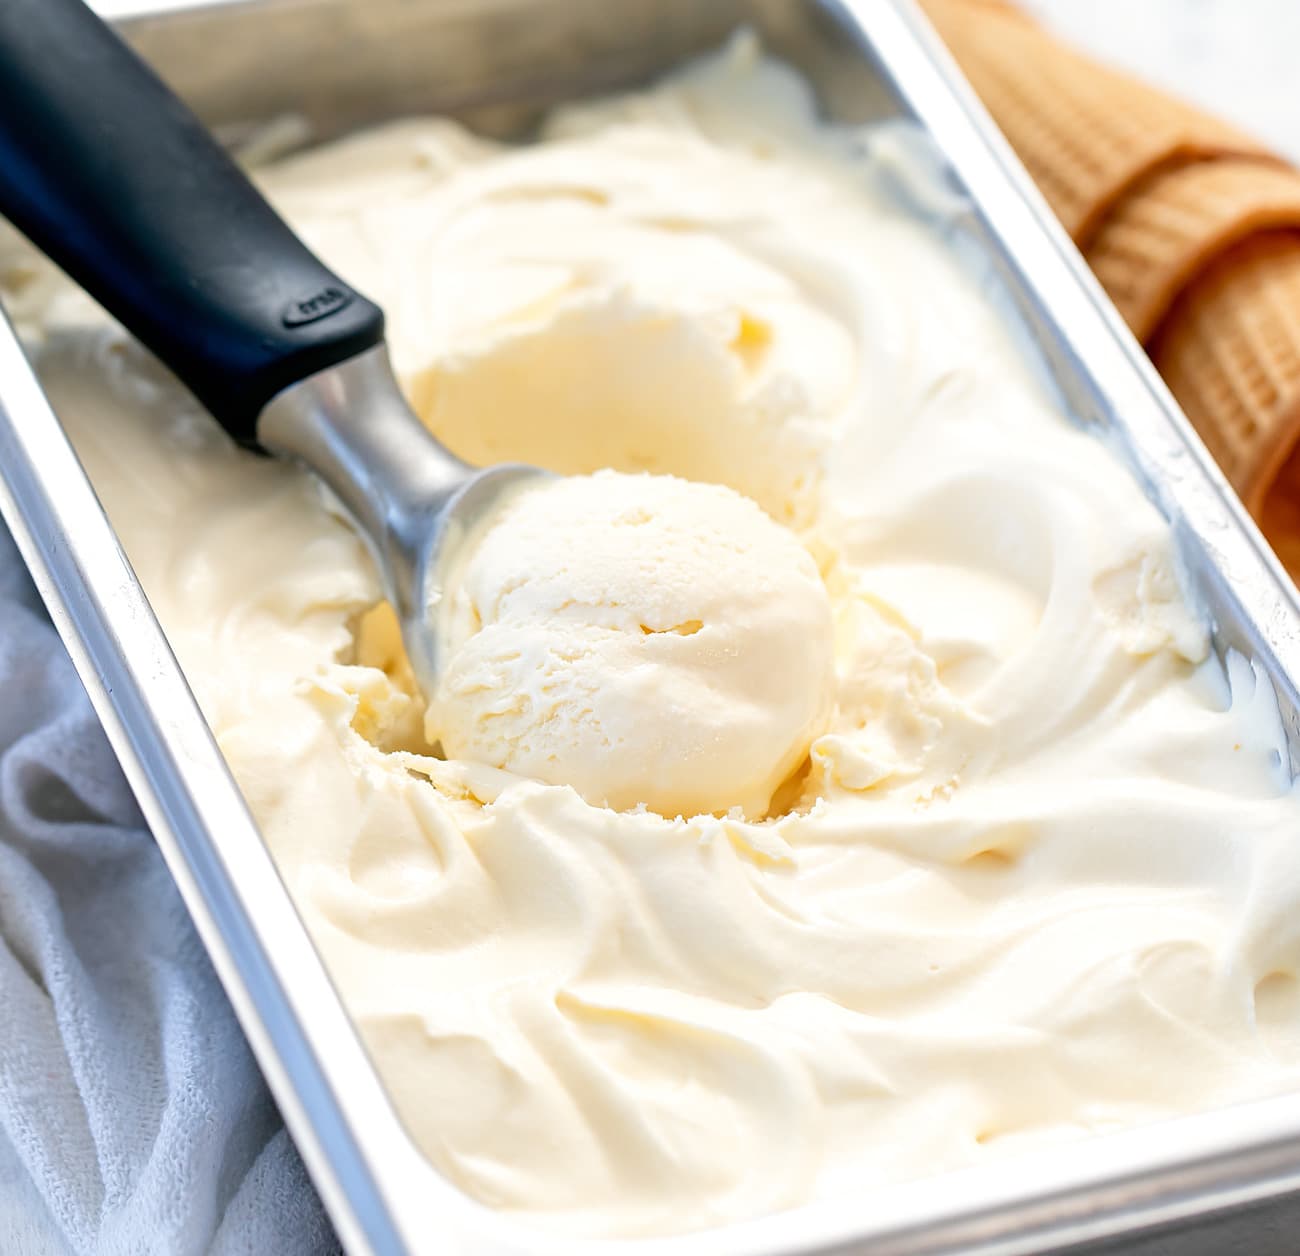 How Do You Make Ice Cream Without An Ice Cream Maker?